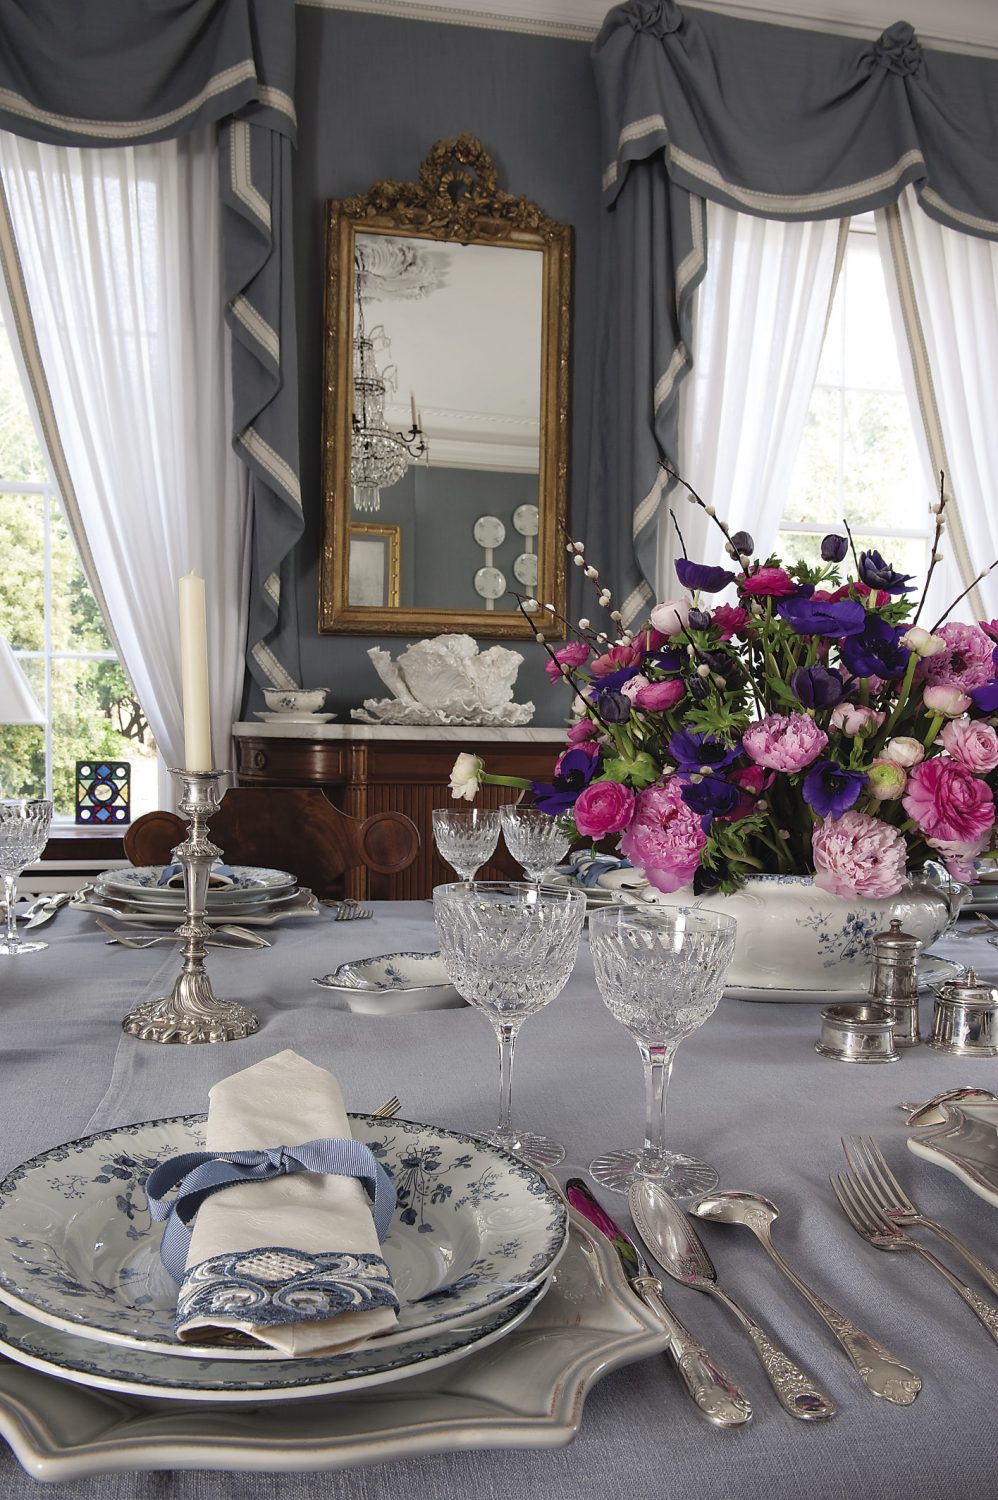 The dining chairs are genuine Gustavian antiques that Theodora bought at Christie’s in London